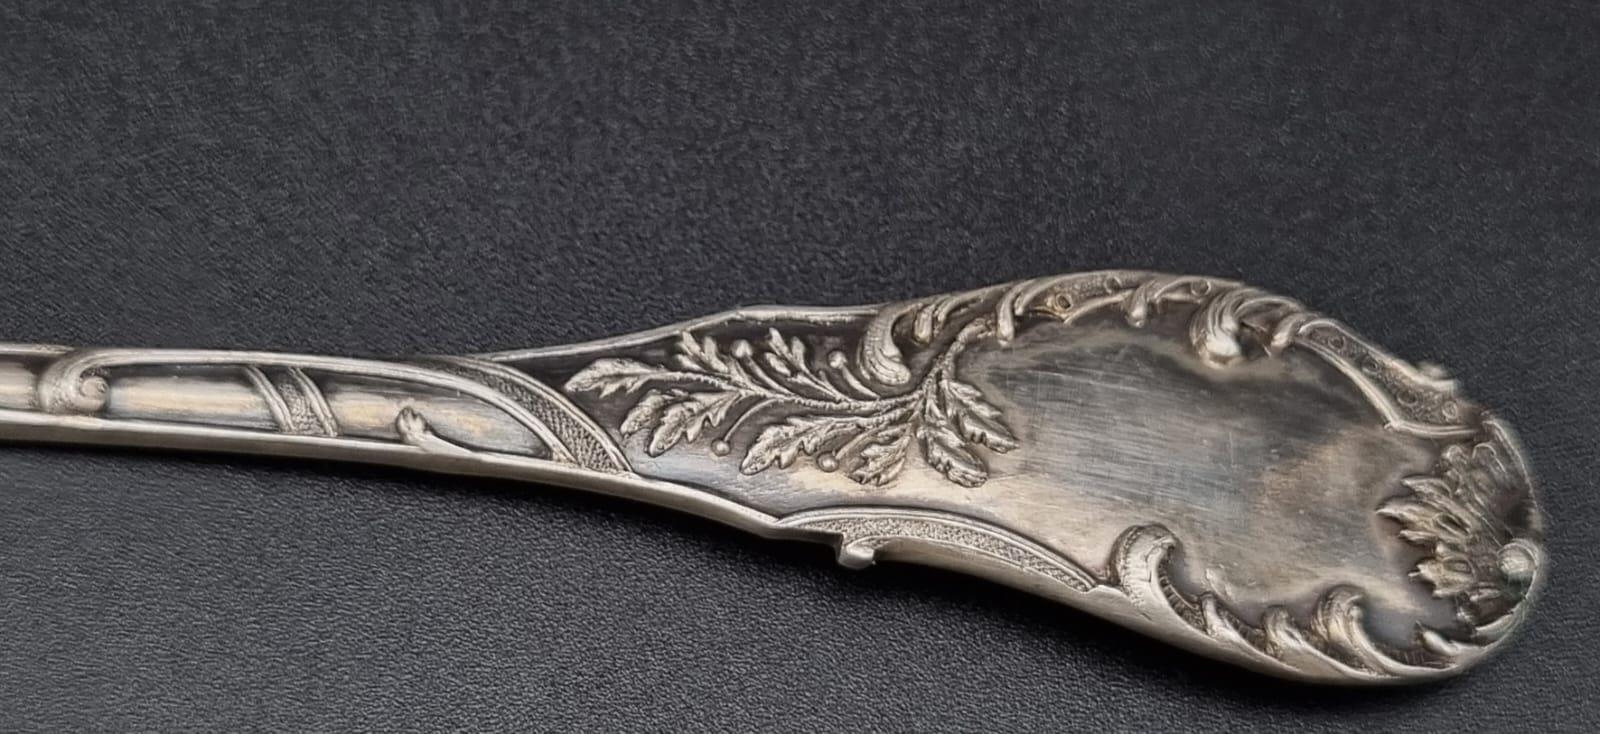 An Antique Silver Fish Serving Knife. 65g. 22cm - Image 9 of 11